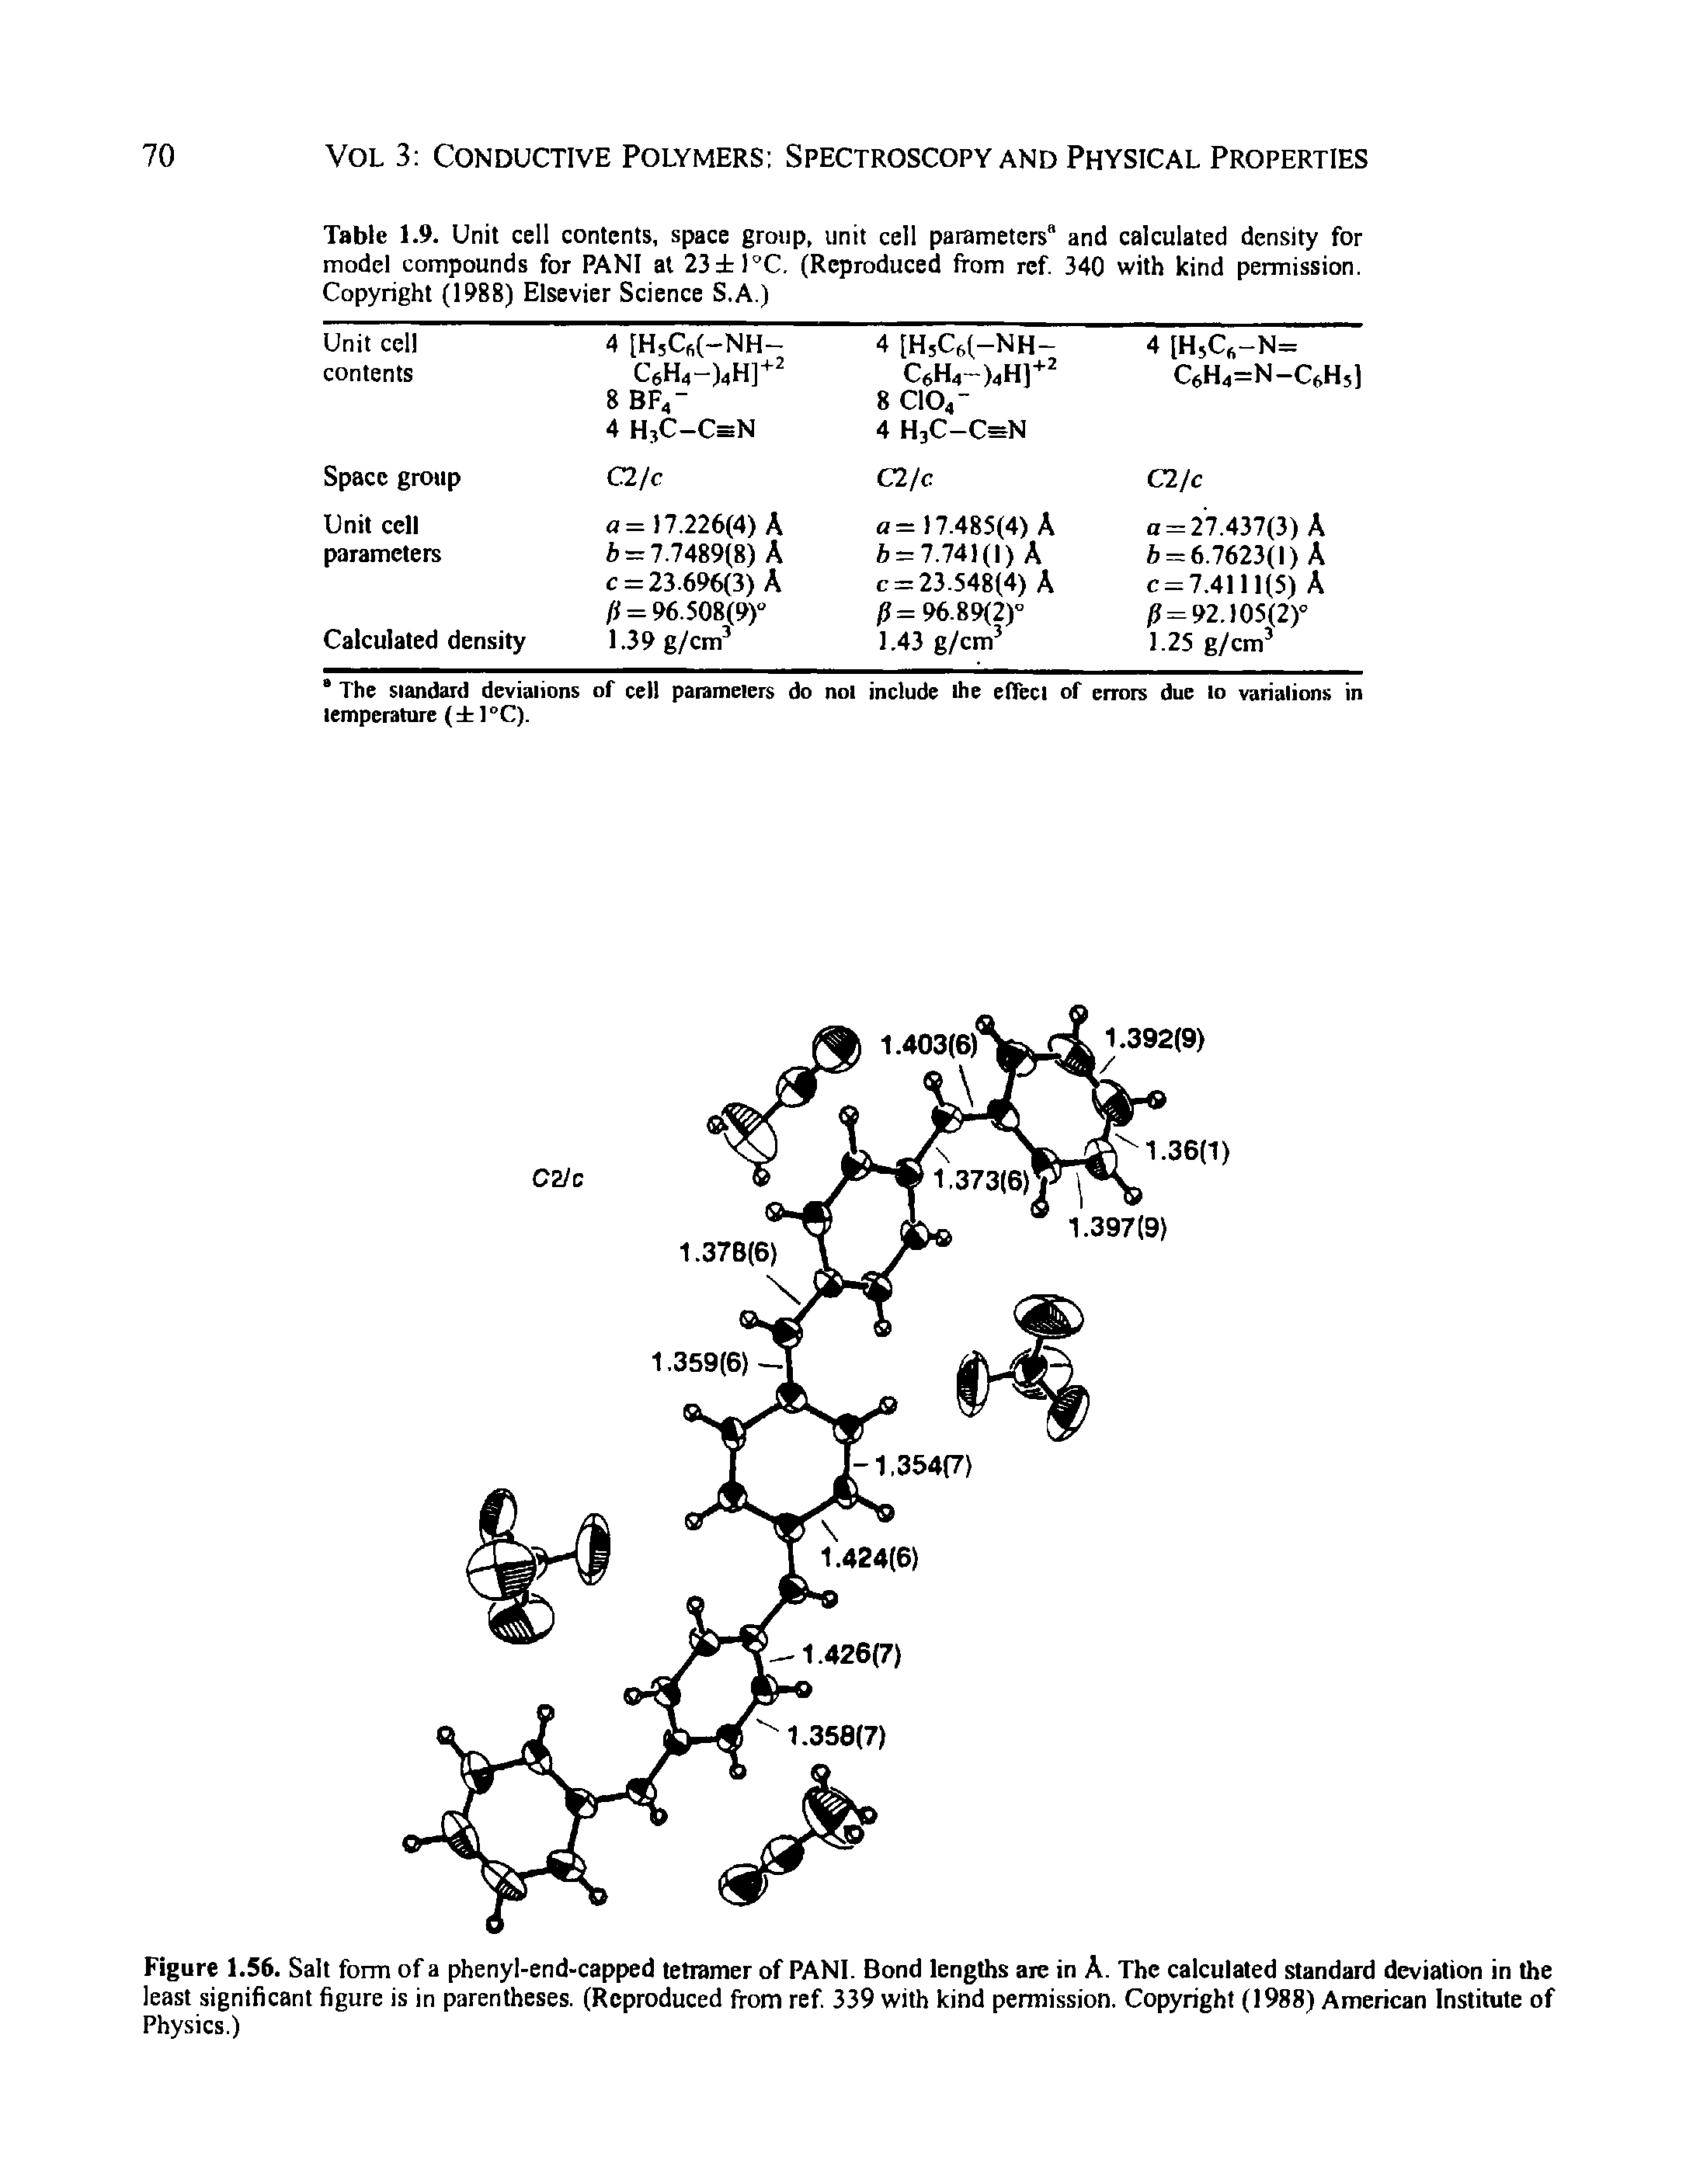 Figure 1.56. Salt form of a phenyl-end-capped tetramer of PANI. Bond lengths are in A. The calculated standard deviation in the least significant figure is in parentheses. (Reproduced from ref 339 with kind permission. Copyright (1988) American Institute of Physics.)...